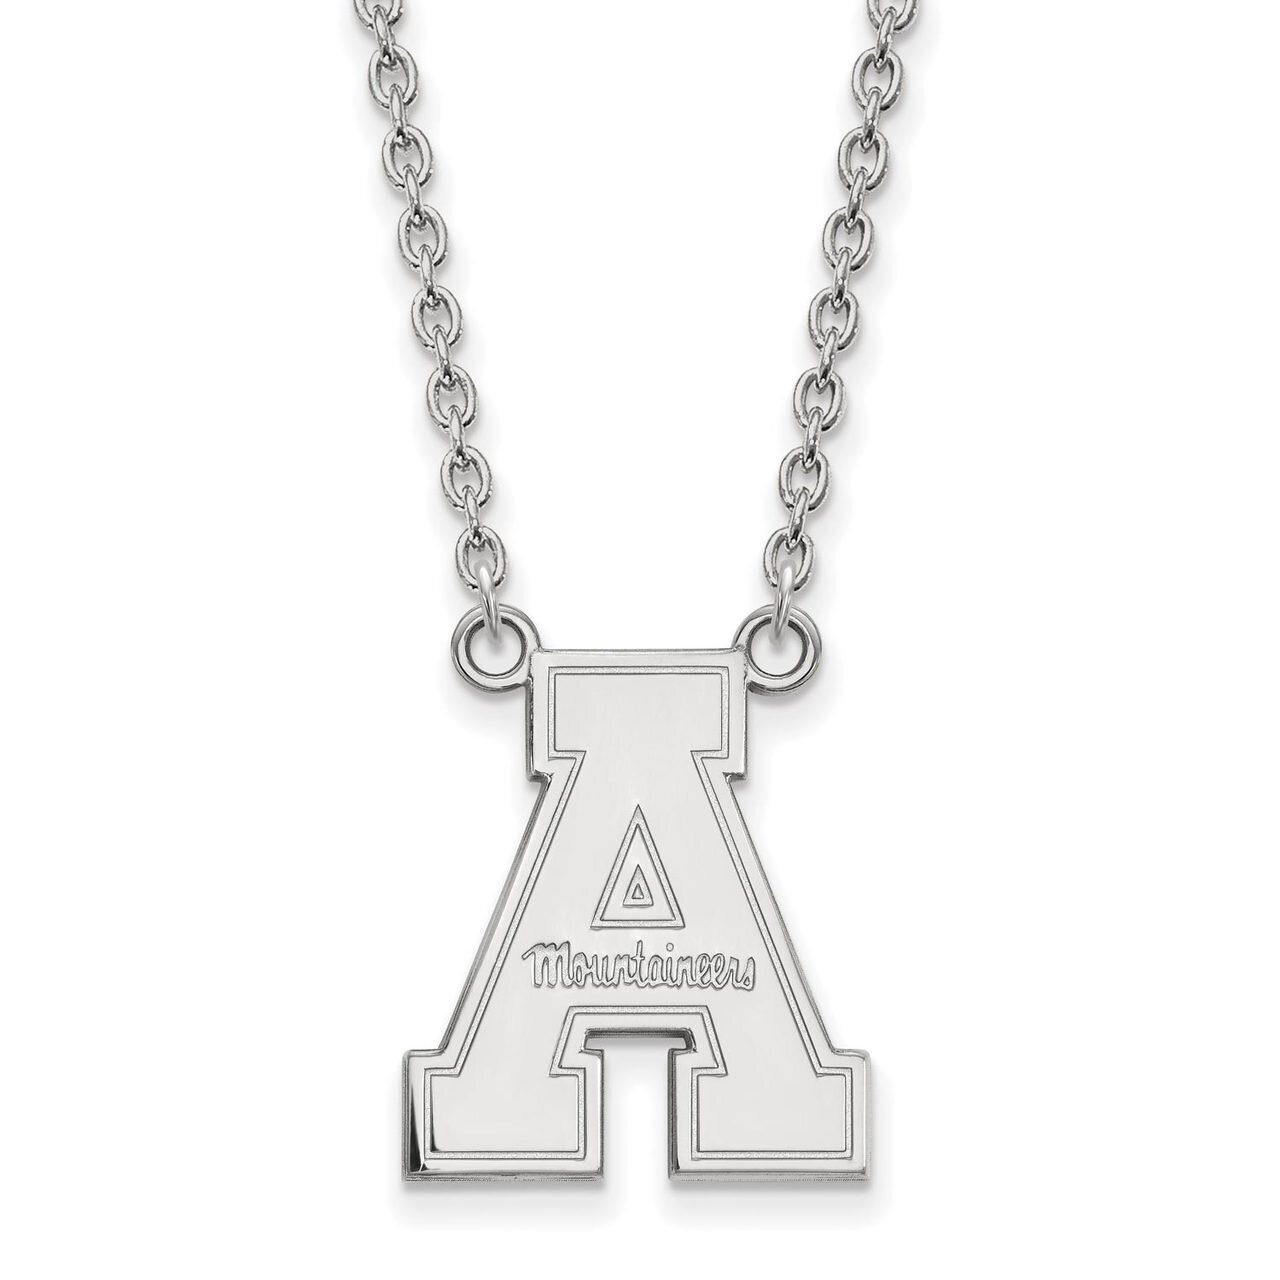 Appalachian State University Large Pendant with Chain Necklace 14k White Gold 4W012APS-18